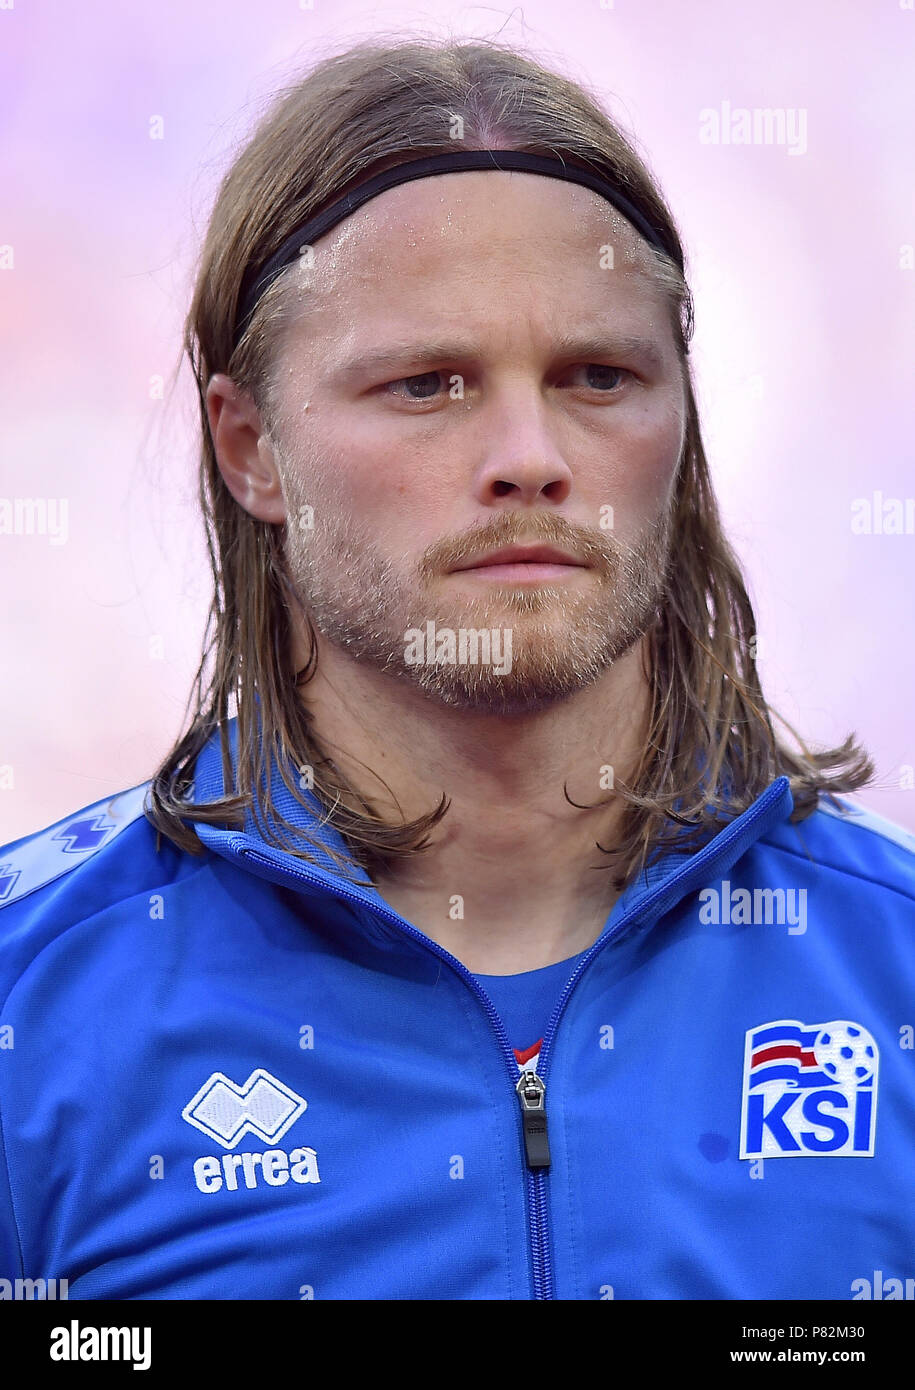 MOSCOW, RUSSIA - JUNE 16: Birkir Bjarnason of Iceland during the 2018 FIFA World Cup Russia group D match between Argentina and Iceland at Spartak Stadium on June 16, 2018 in Moscow, Russia. (Photo by Lukasz Laskowski/PressFocus/MB Media) Stock Photo